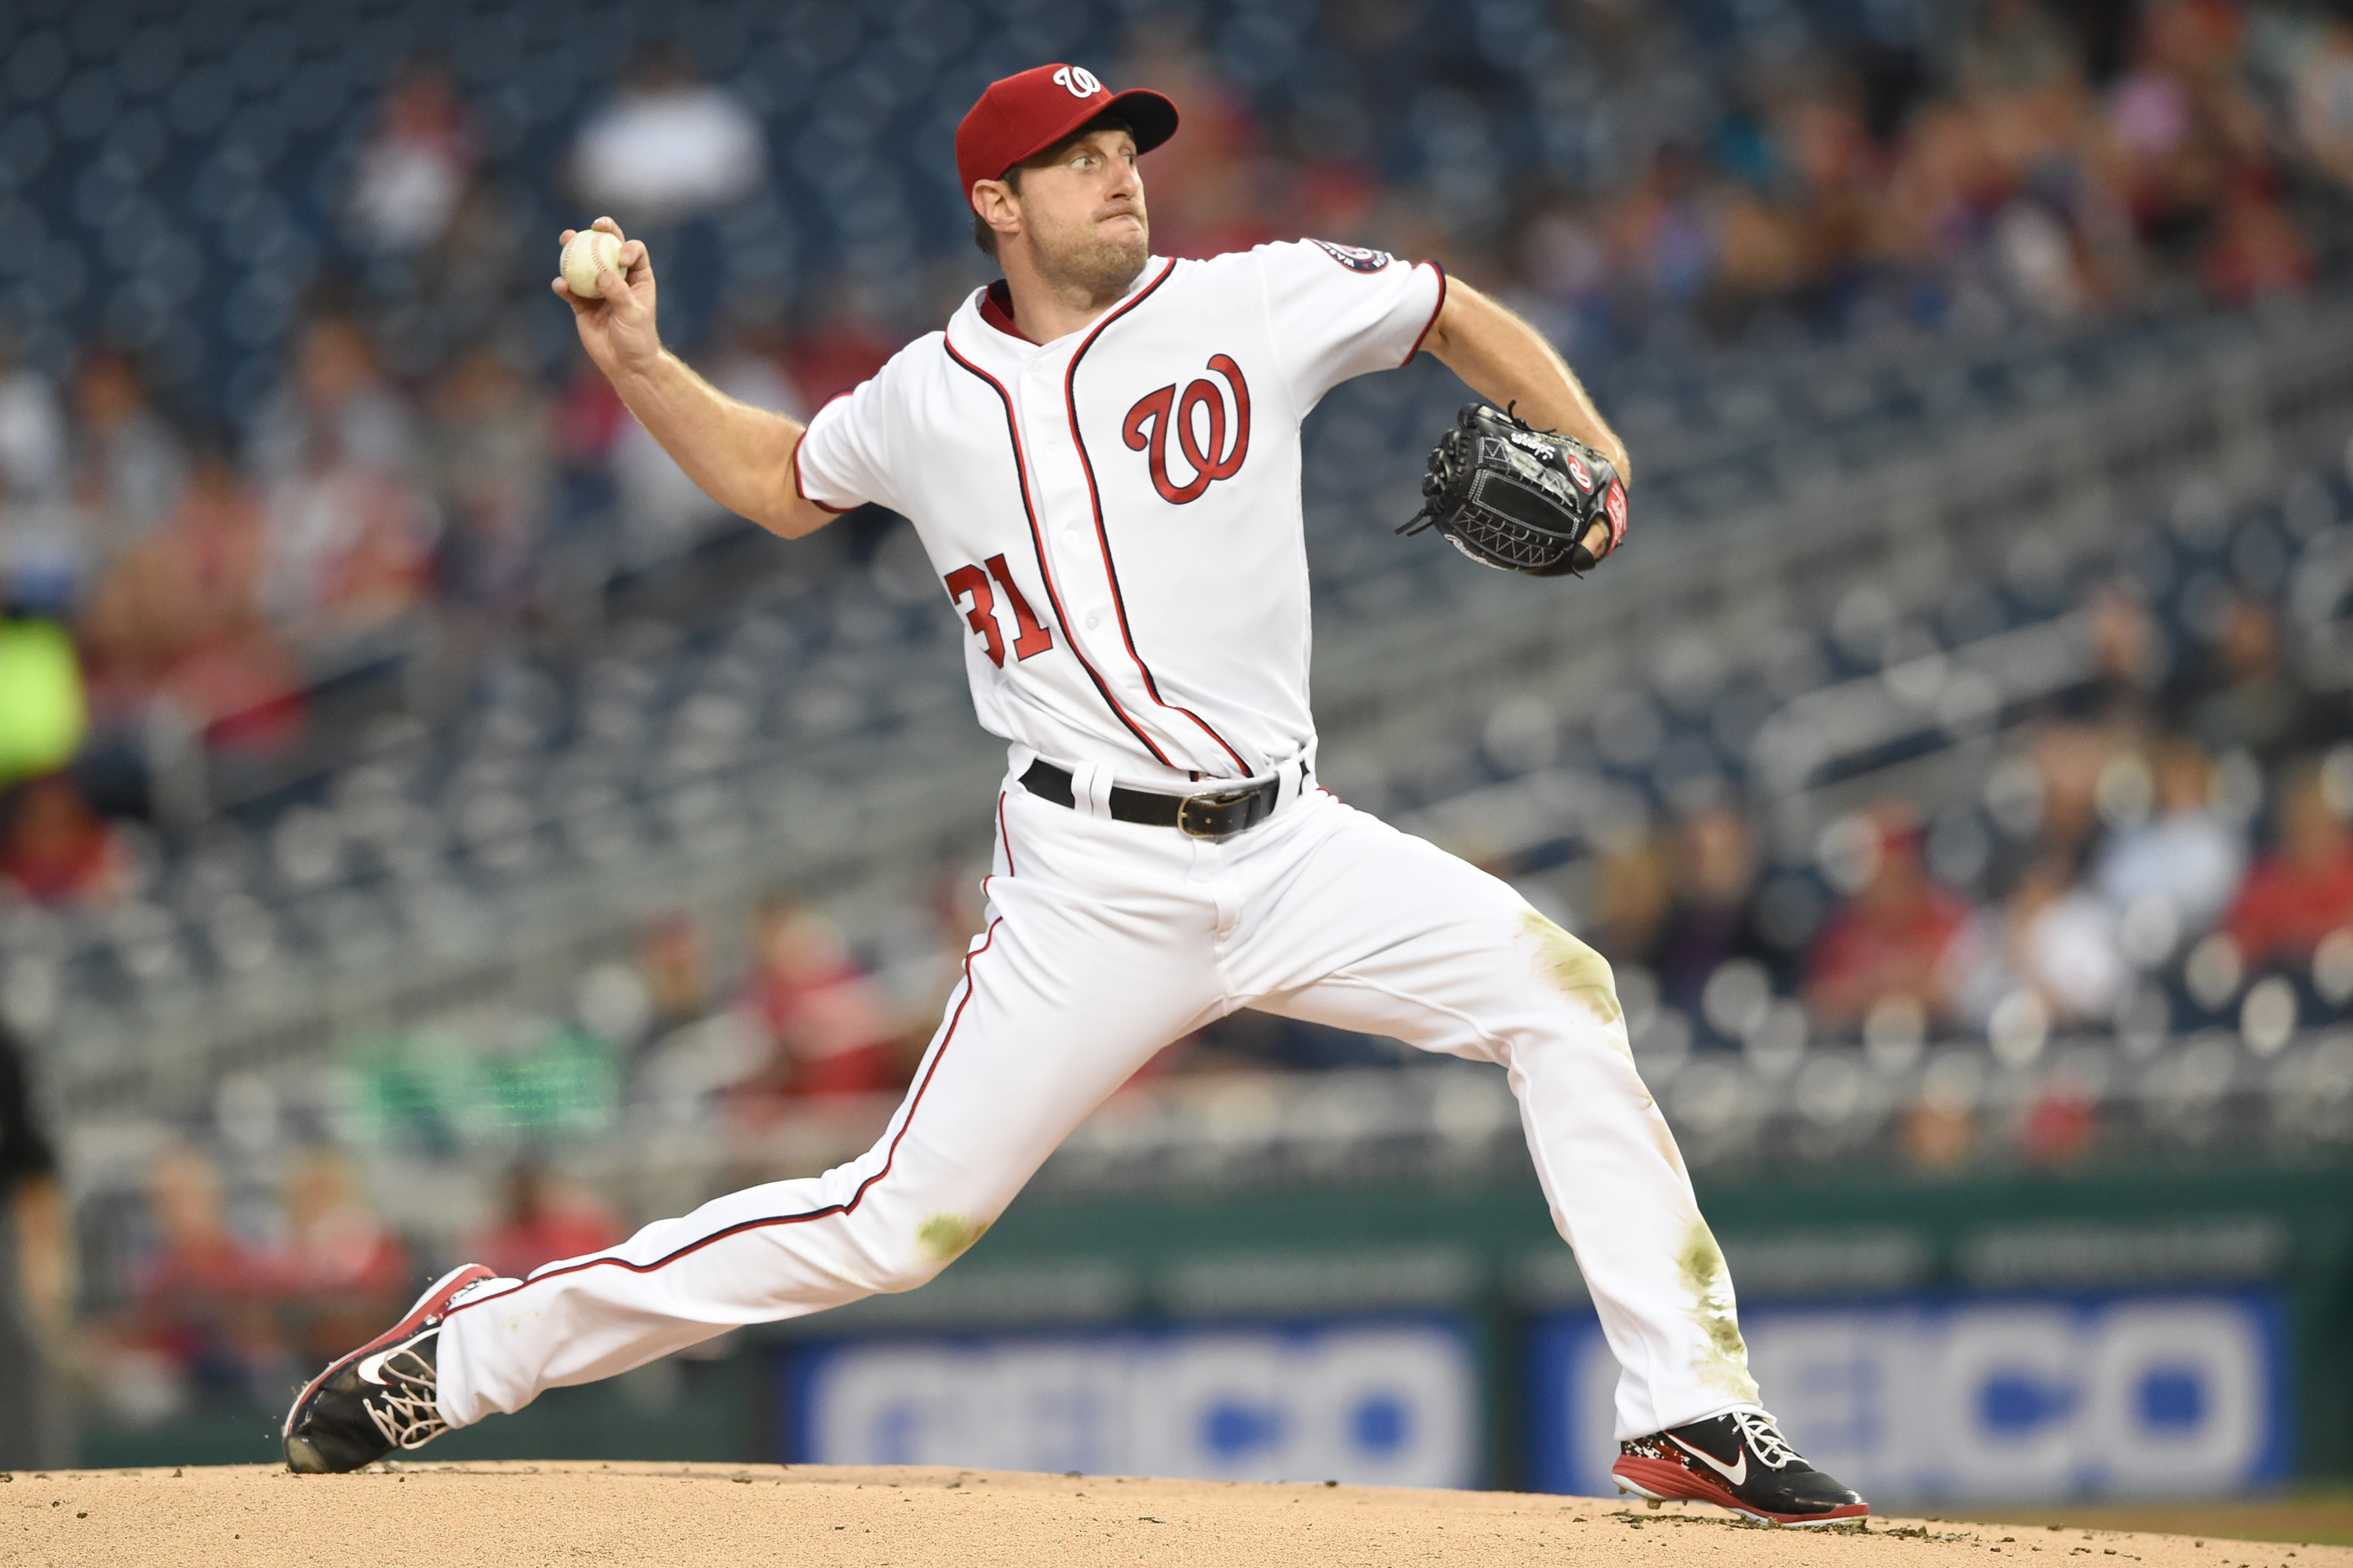 ESPN Stats & Info on X: Max Scherzer is the 2nd player in Nationals/Expos  history to reach 300 strikeouts in a season, joining Pedro Martínez in 1997  for the Expos. Martínez struck